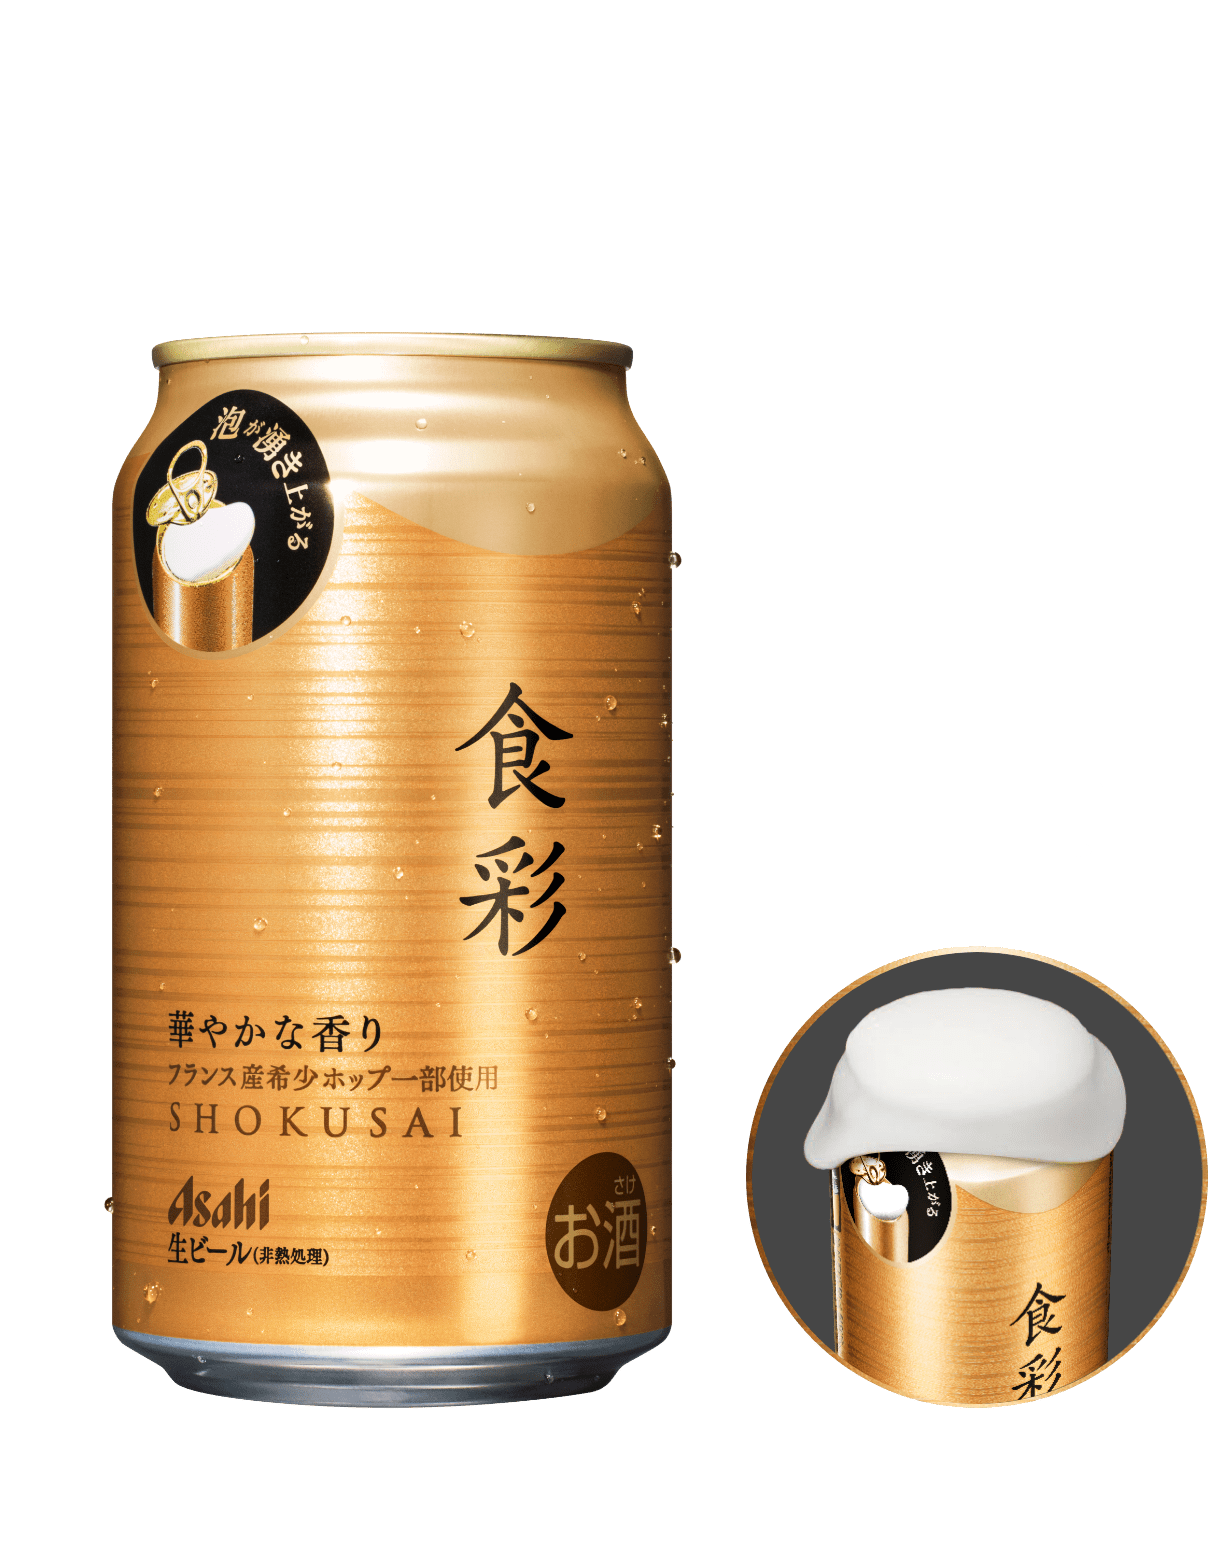 Please drink Asahi Shokusai thoroughly chilled. Be careful of foam spraying out!